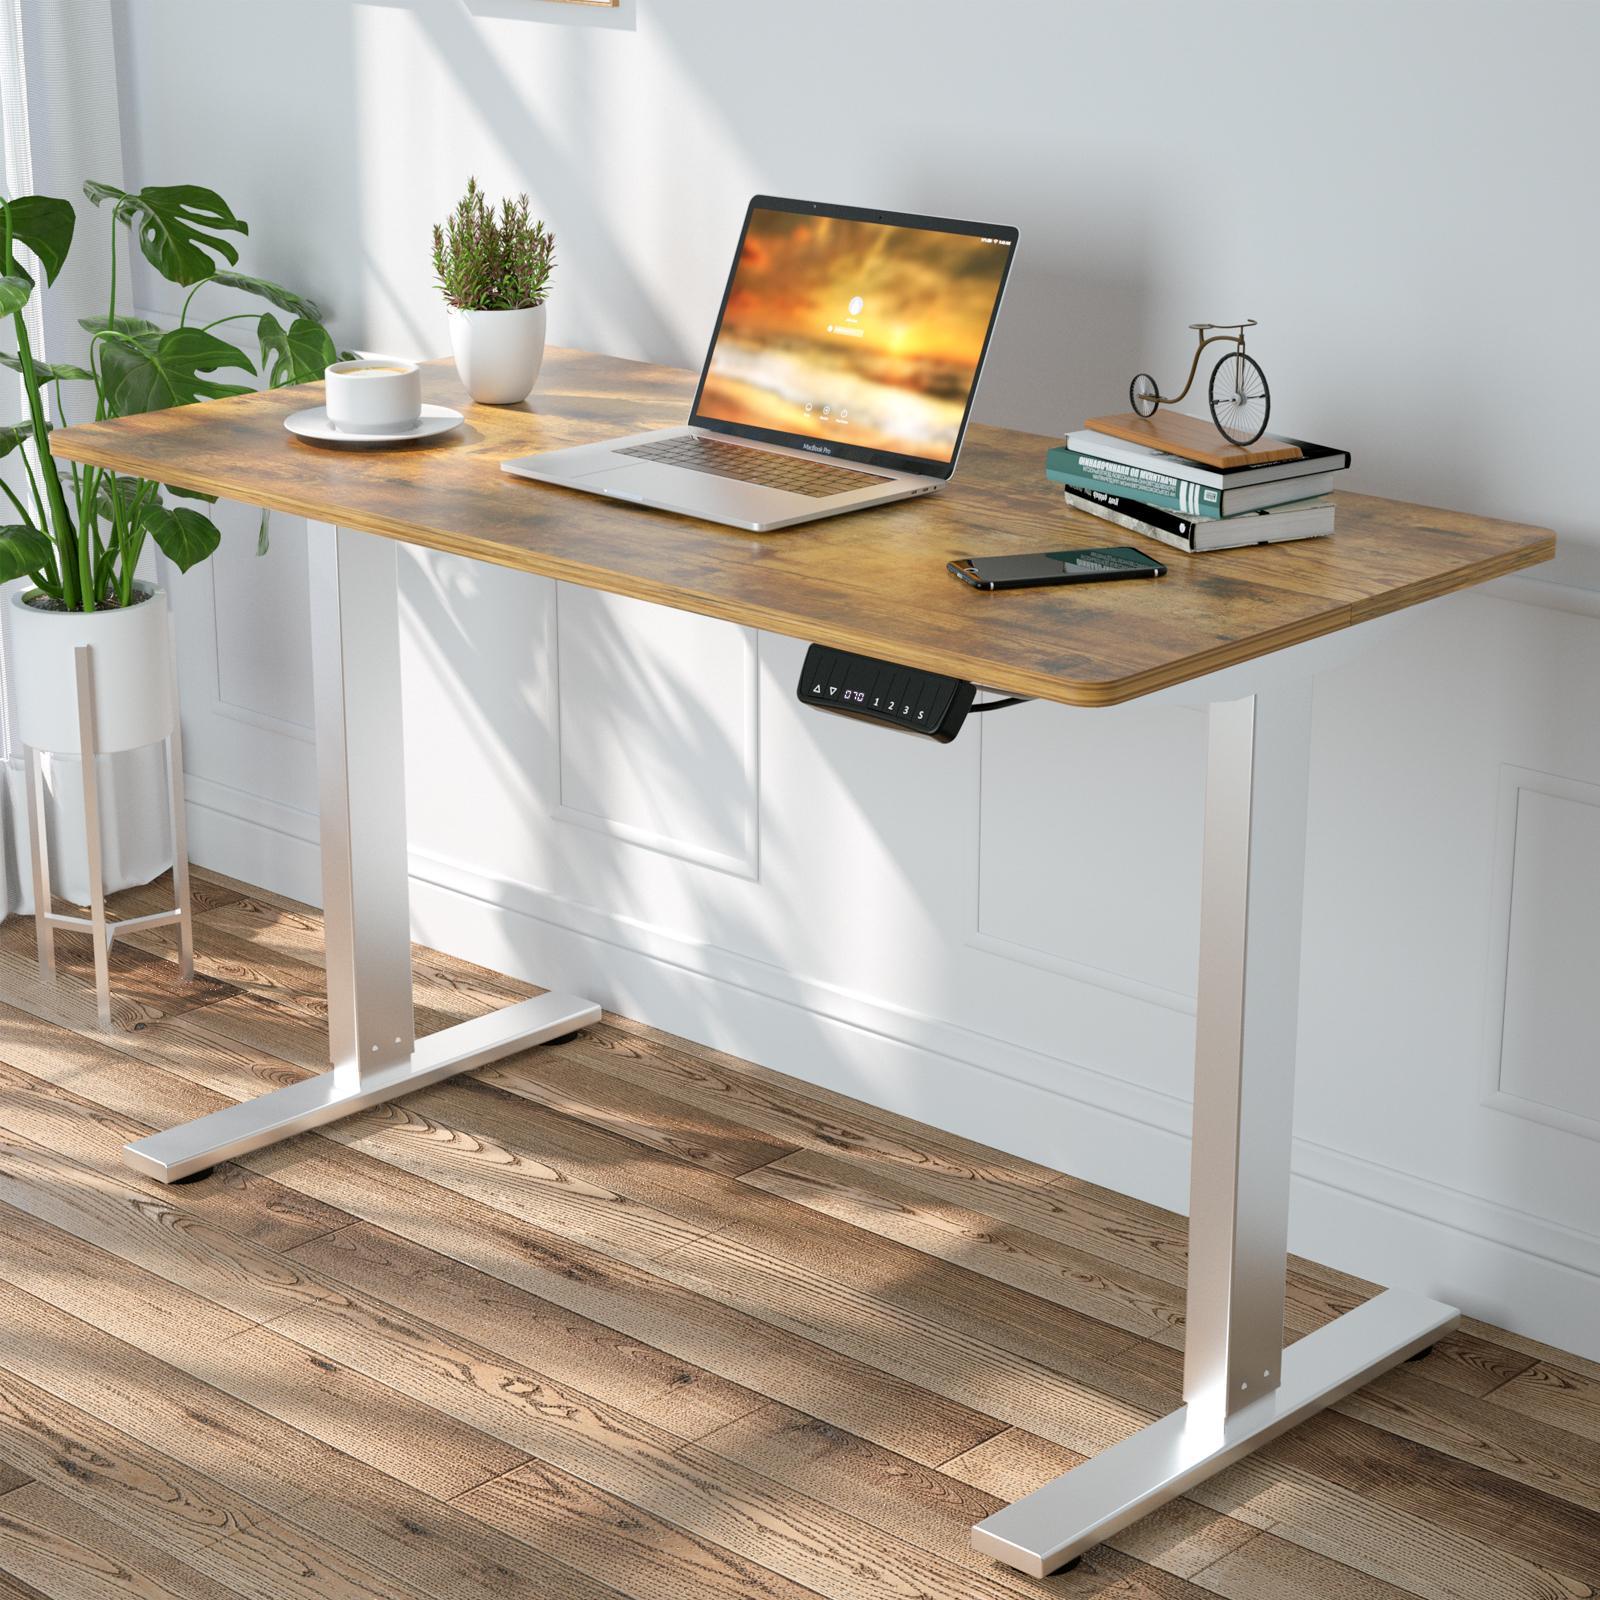 Advwin Adjustable Height Electric Standing Desk Walnut Color